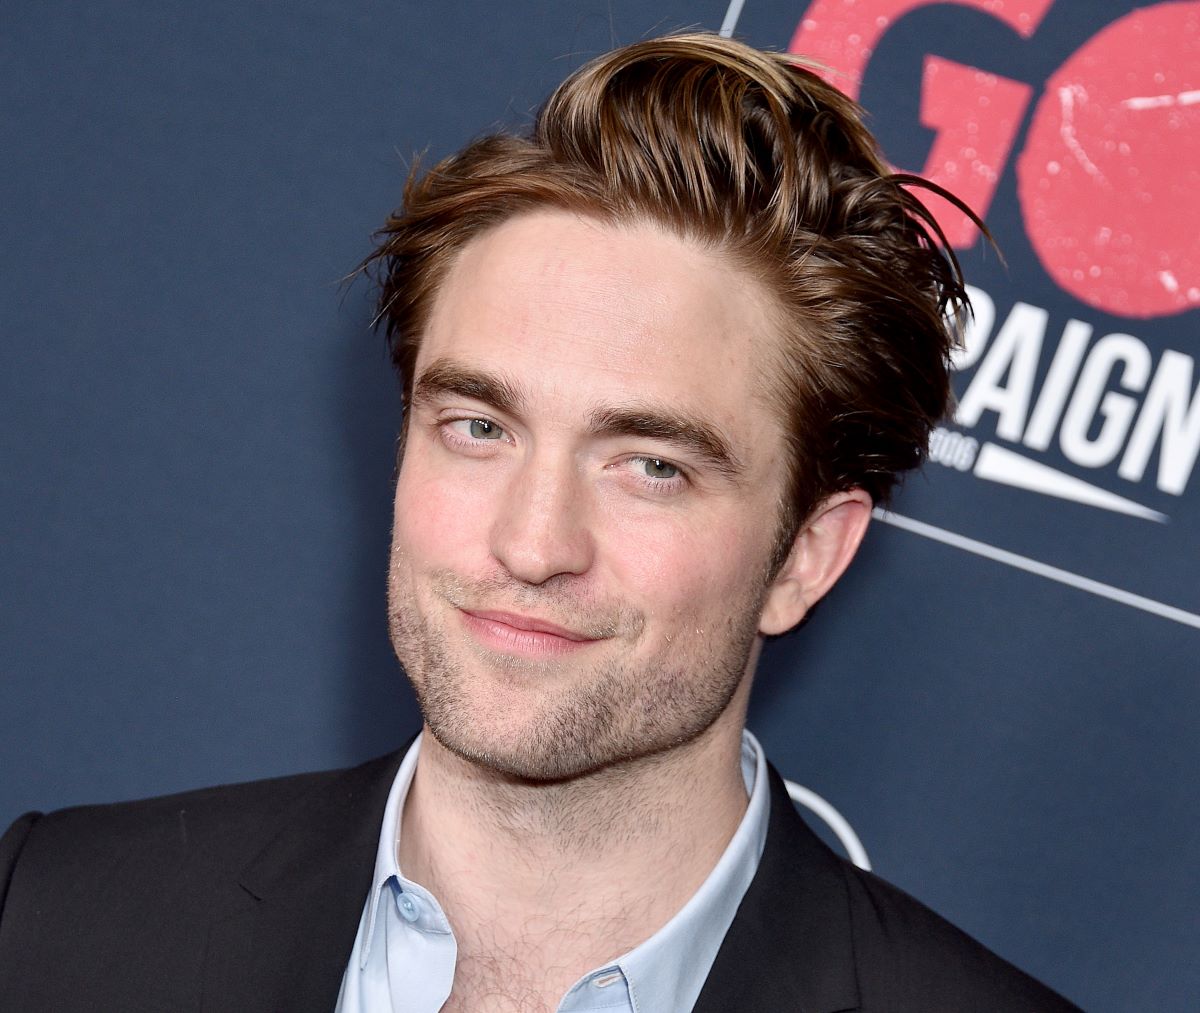 'Twilight' and 'The Batman' star Robert Pattinson in 2019 on the red carpet